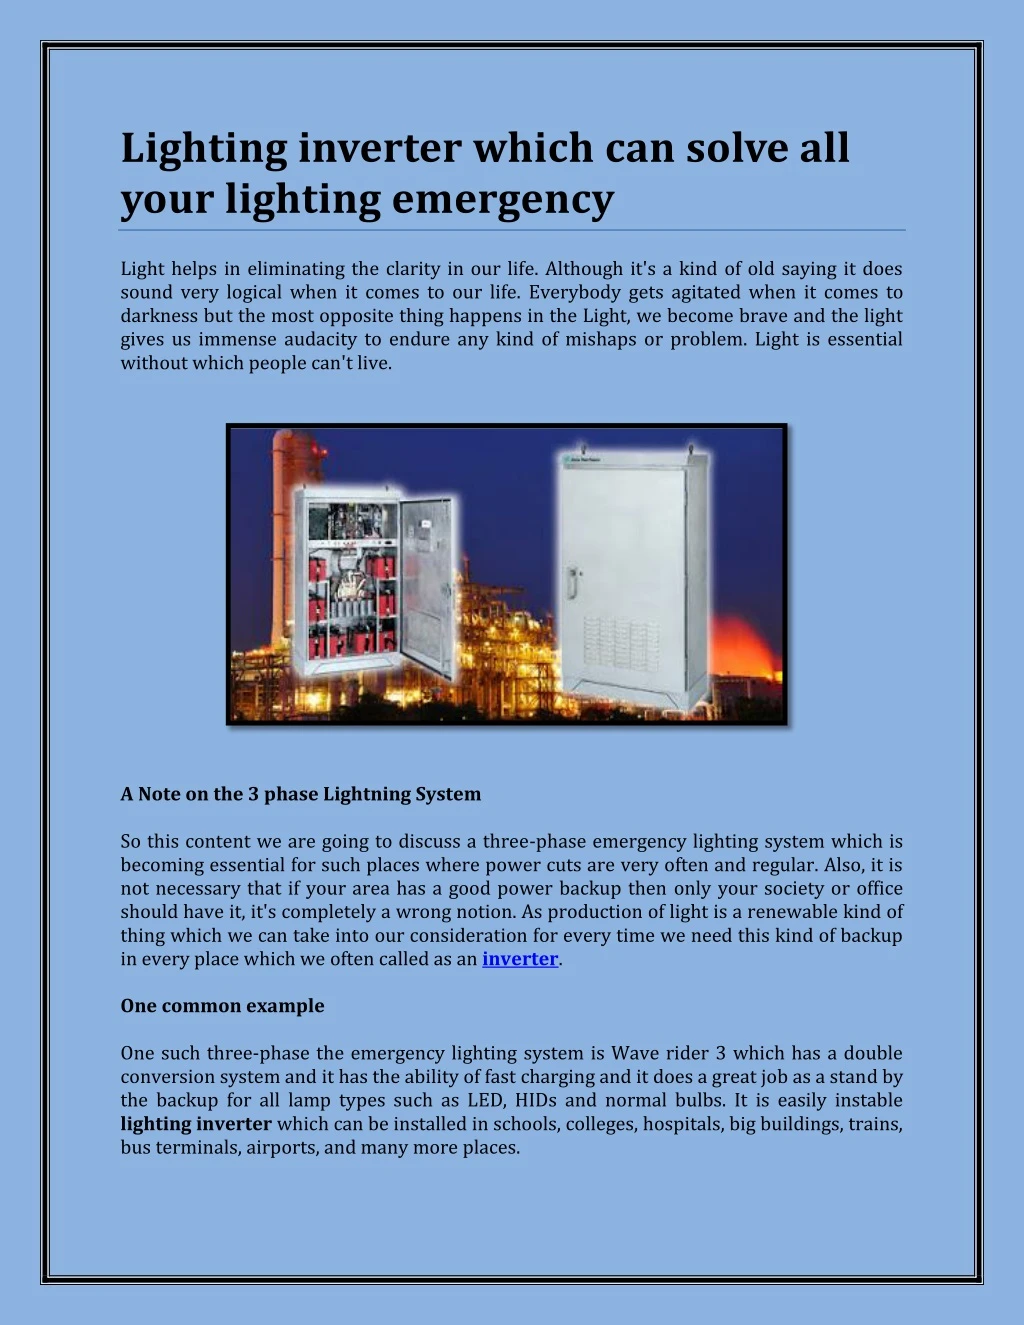 lighting inverter which can solve all your